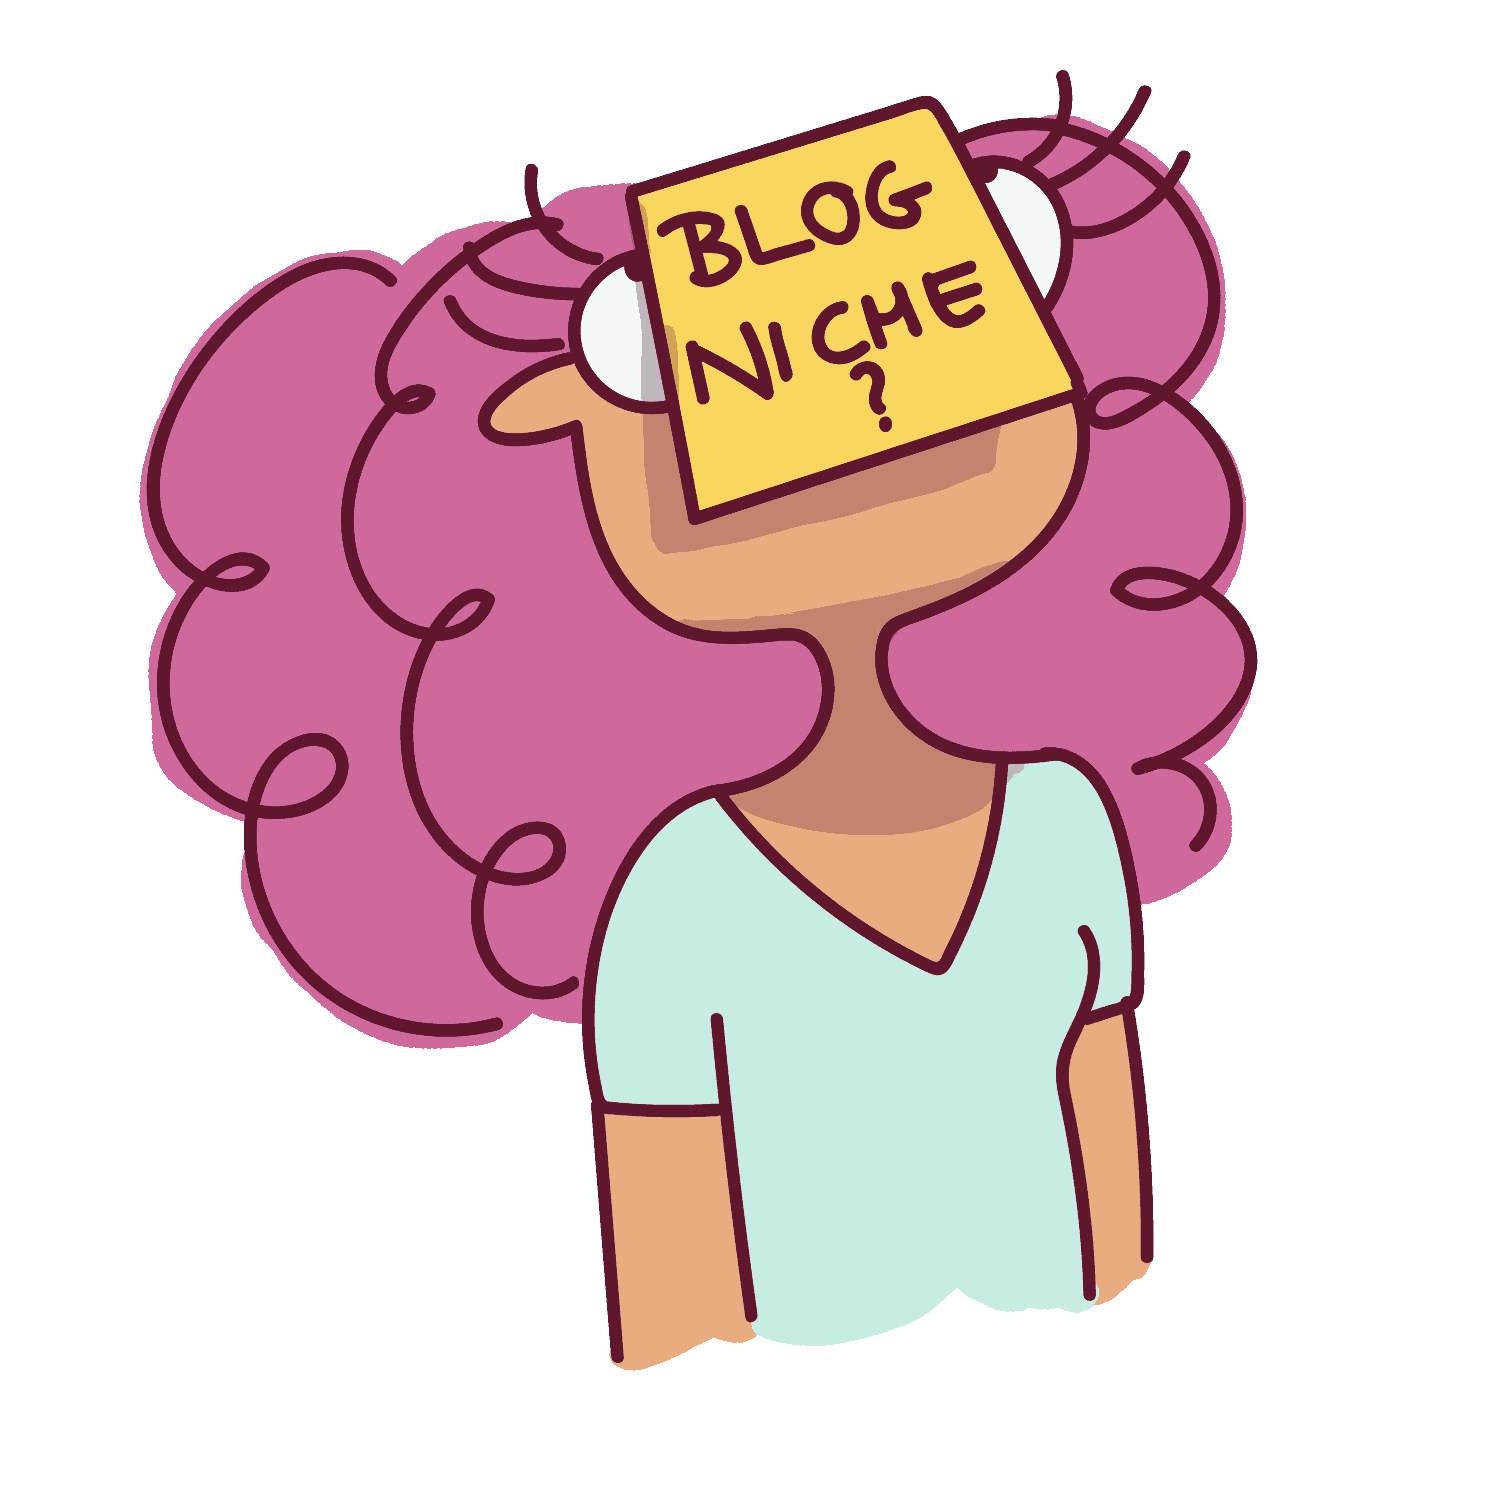 Why do we Bloggers really require a blog niche? Read this post to find out!